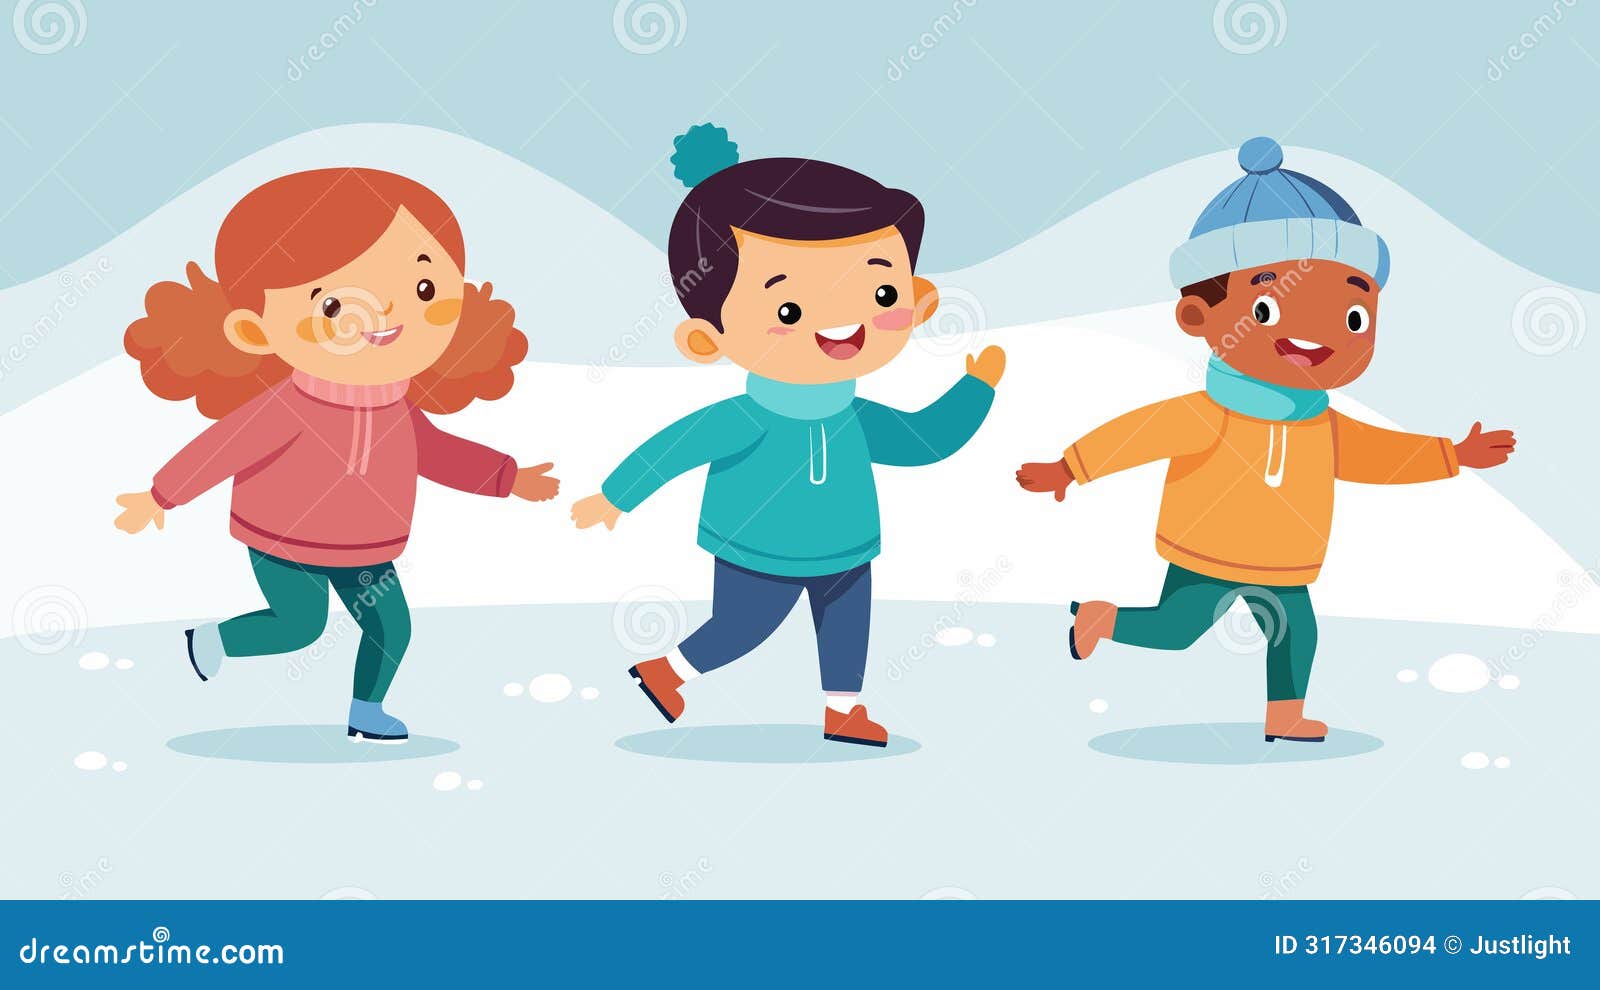 as they take their first wobbly strides on the ice a group of toddlers squeal with excitement and hold each others hands